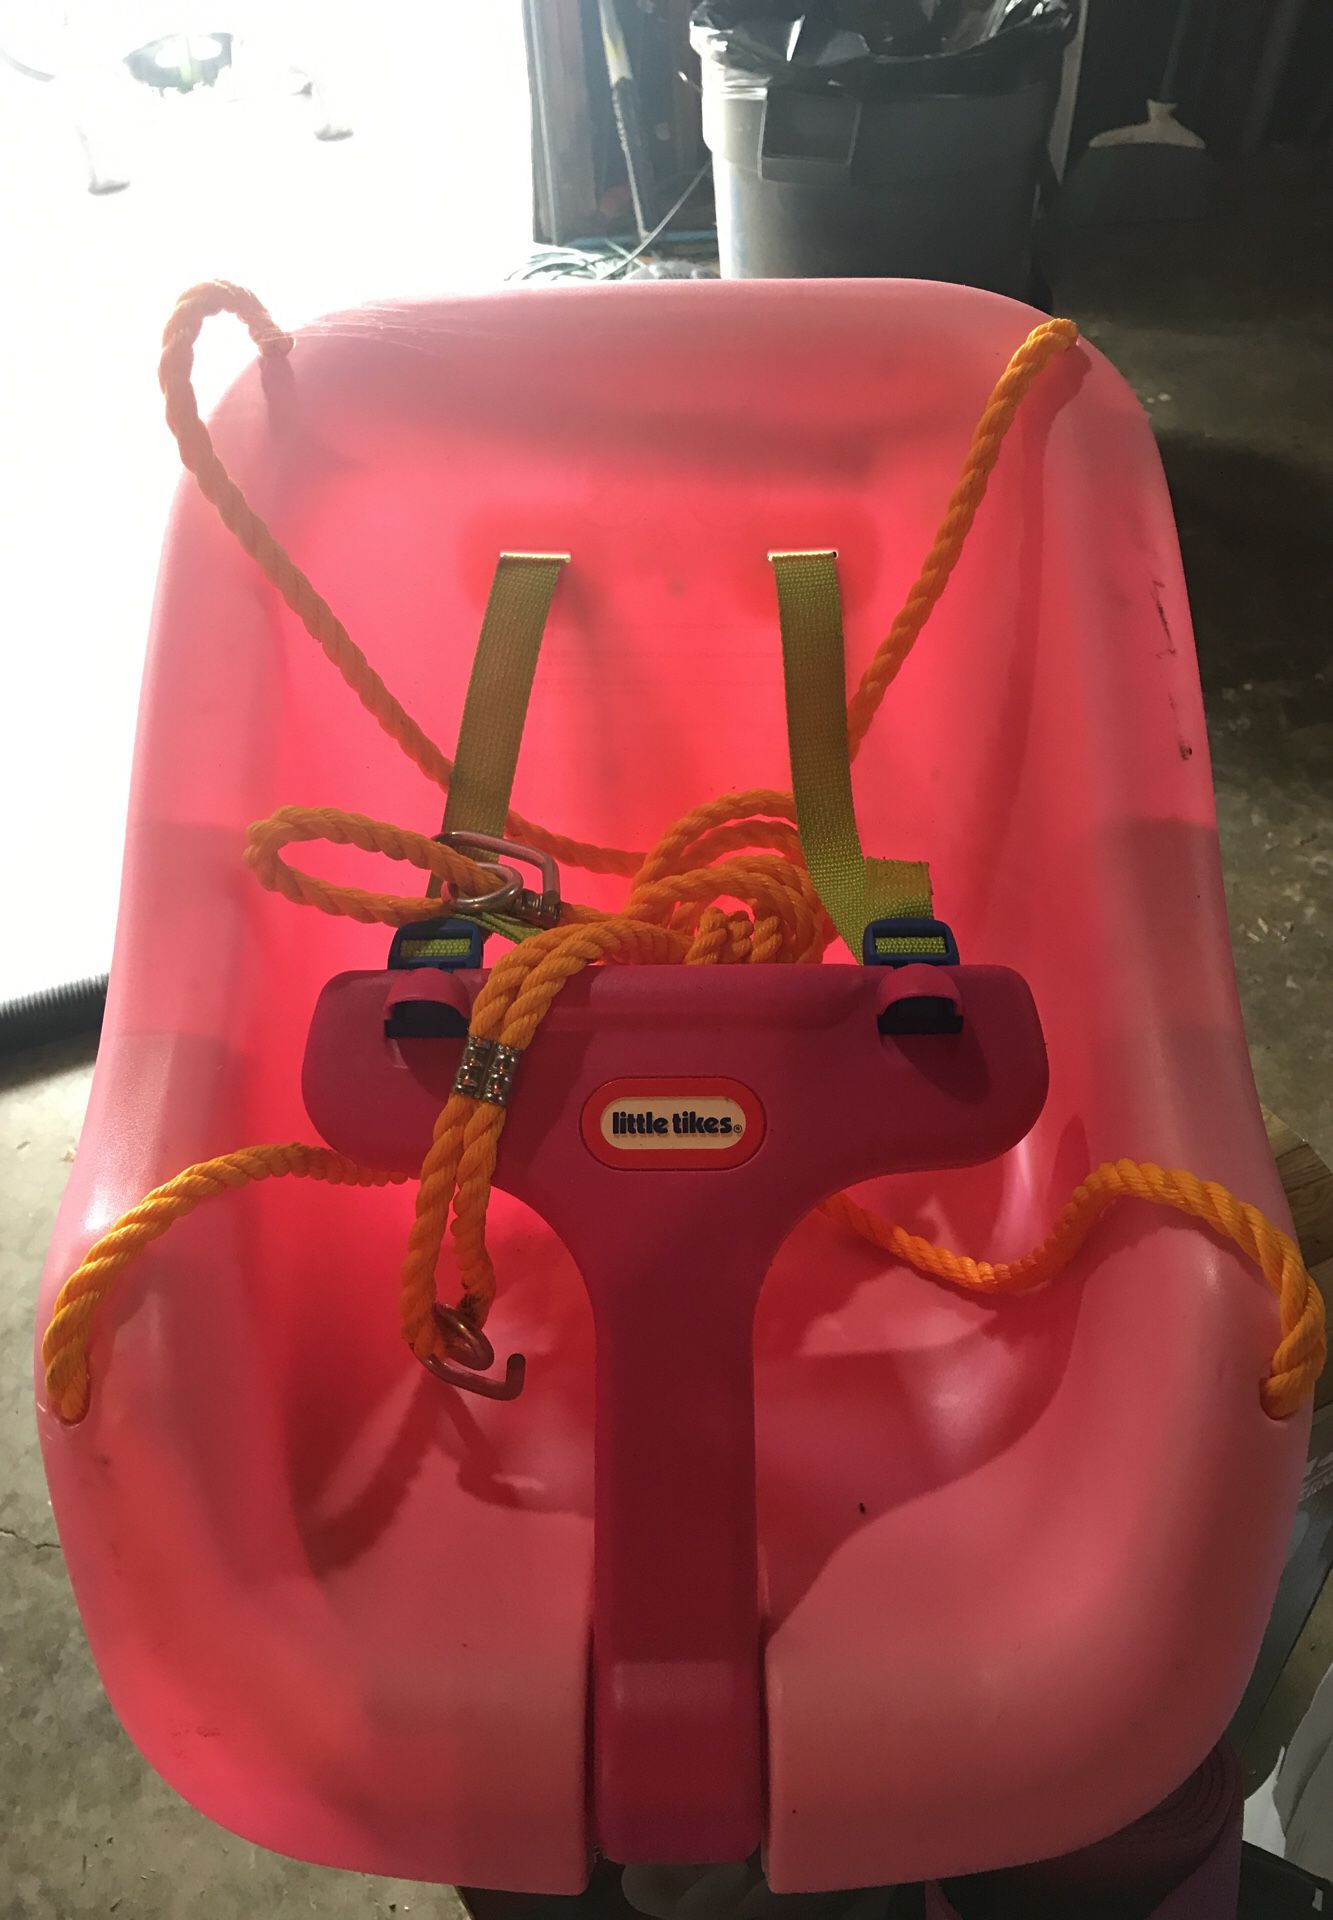 Little tikes swing - brand new but has some marks